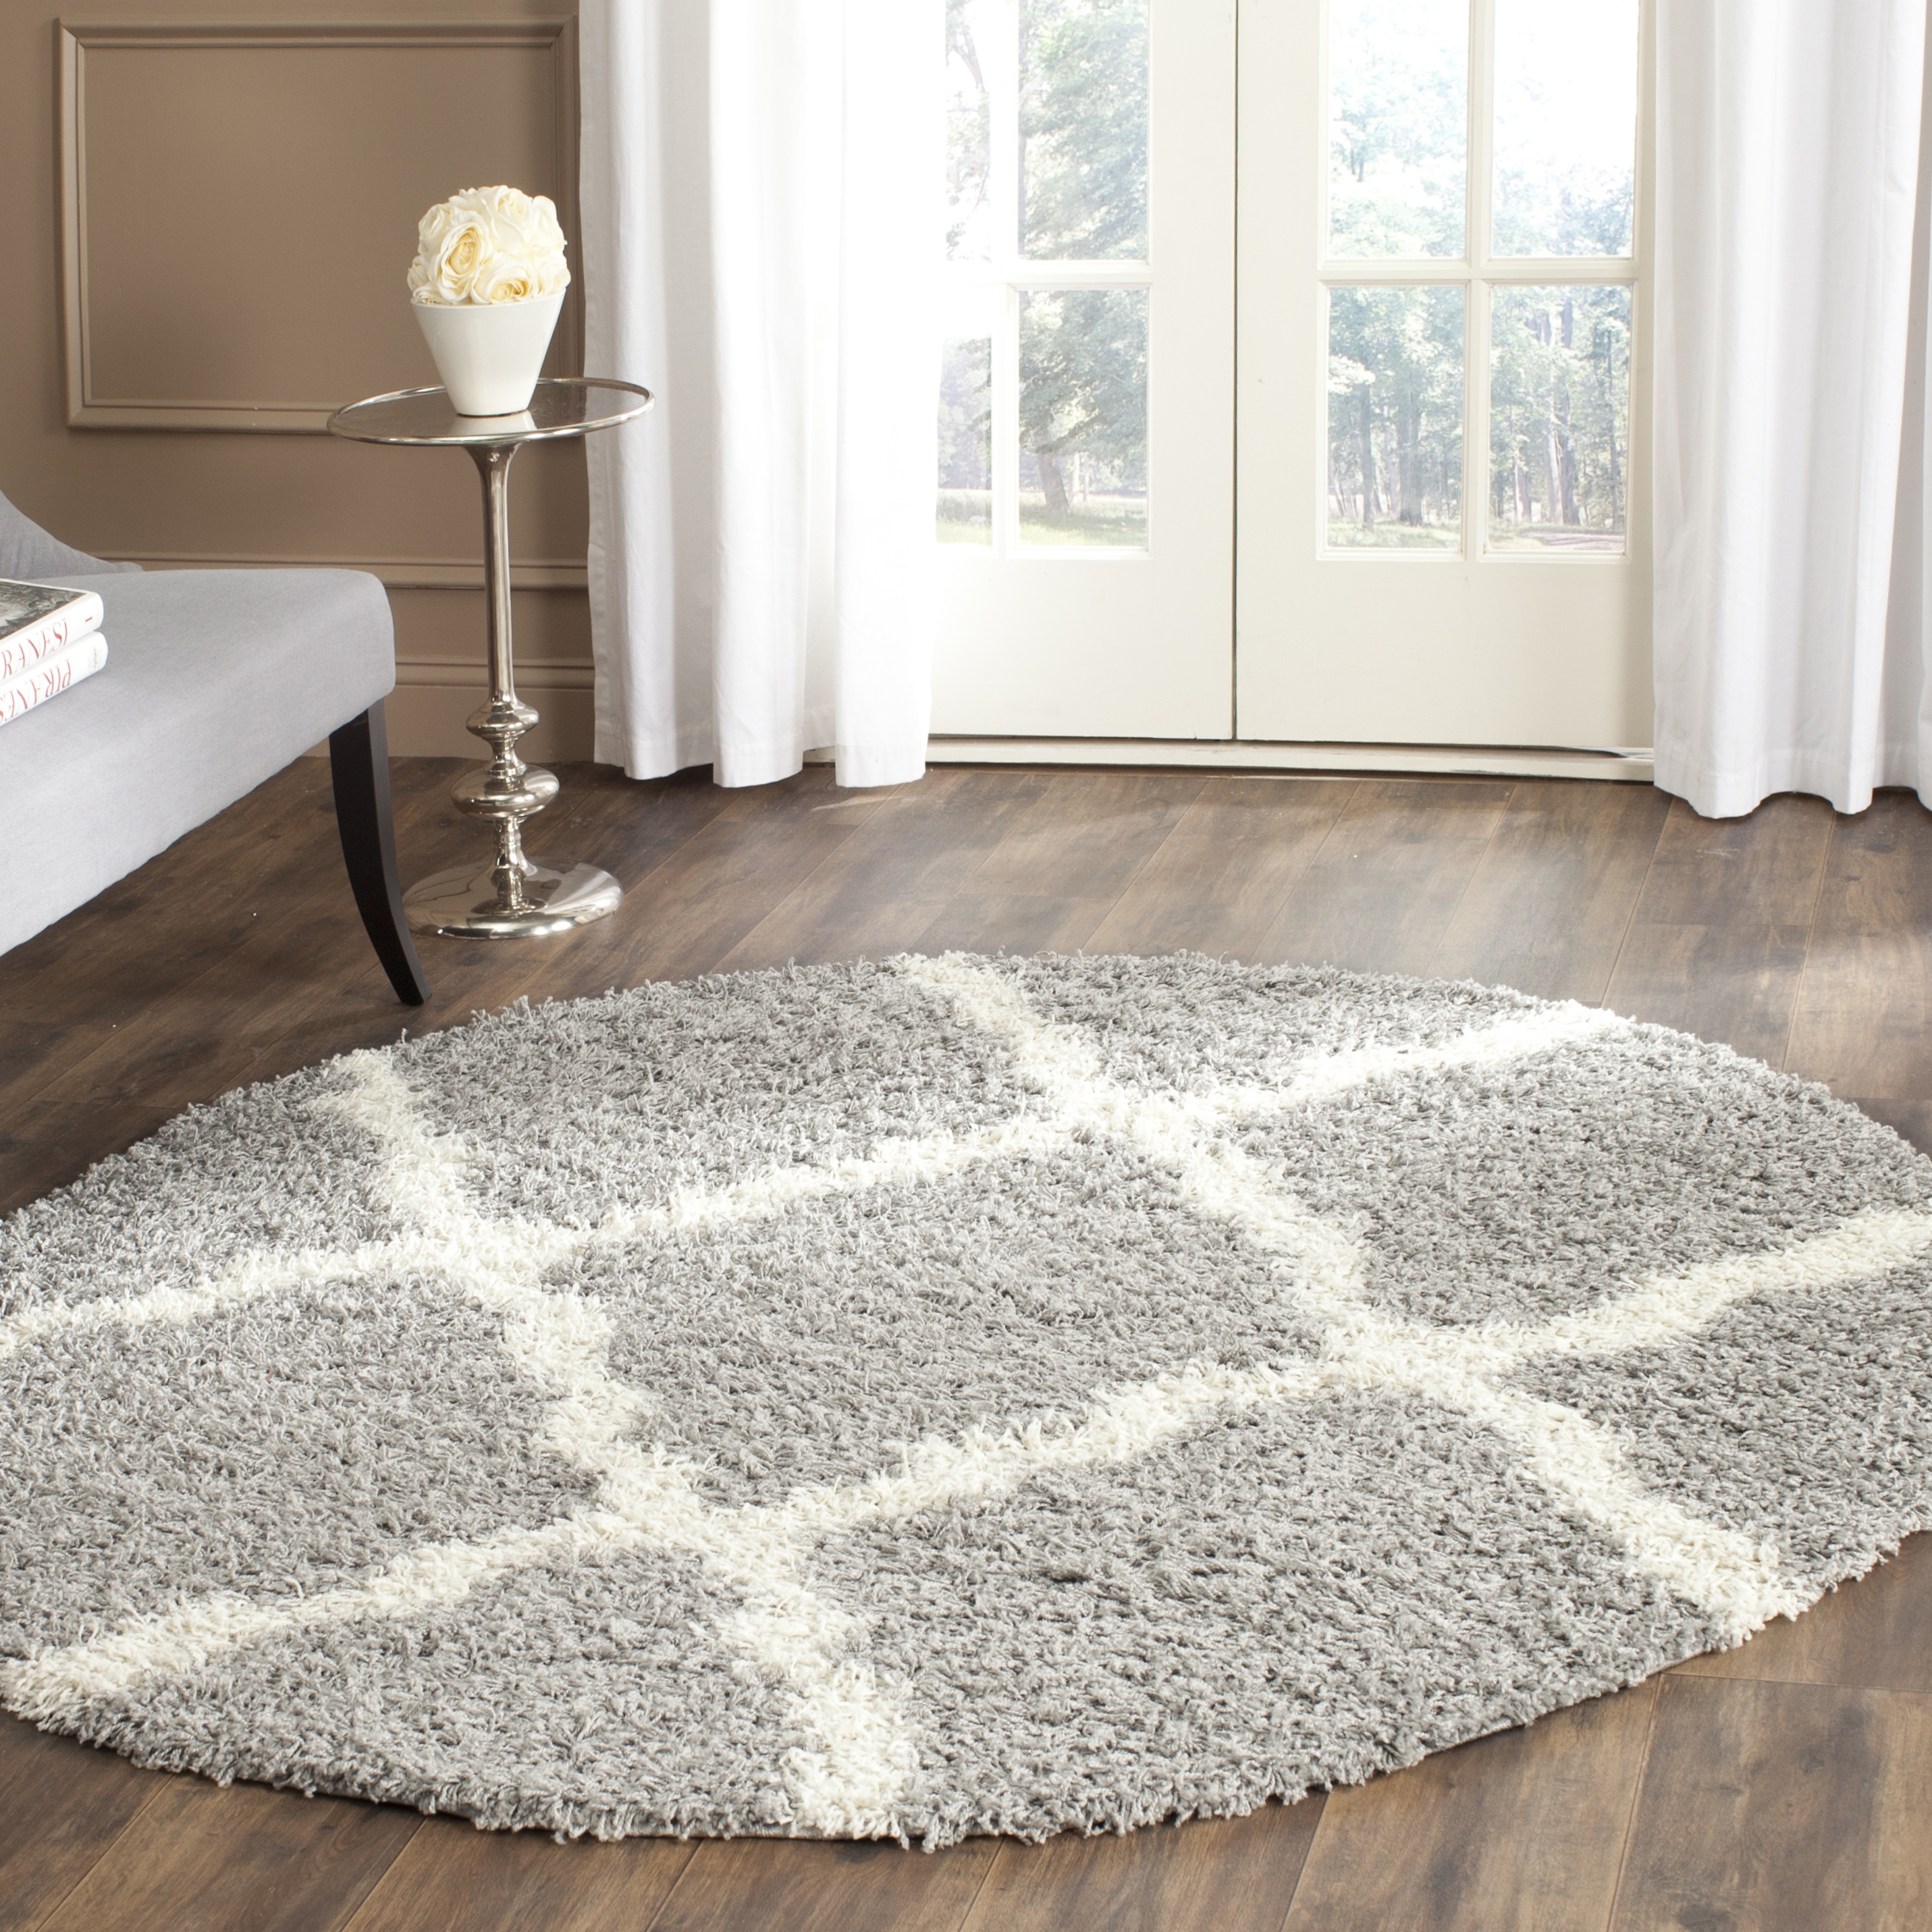 Arlo Home Woven Area Rug, SGD257G, Grey/Ivory,  8' X 8' Round - Image 1